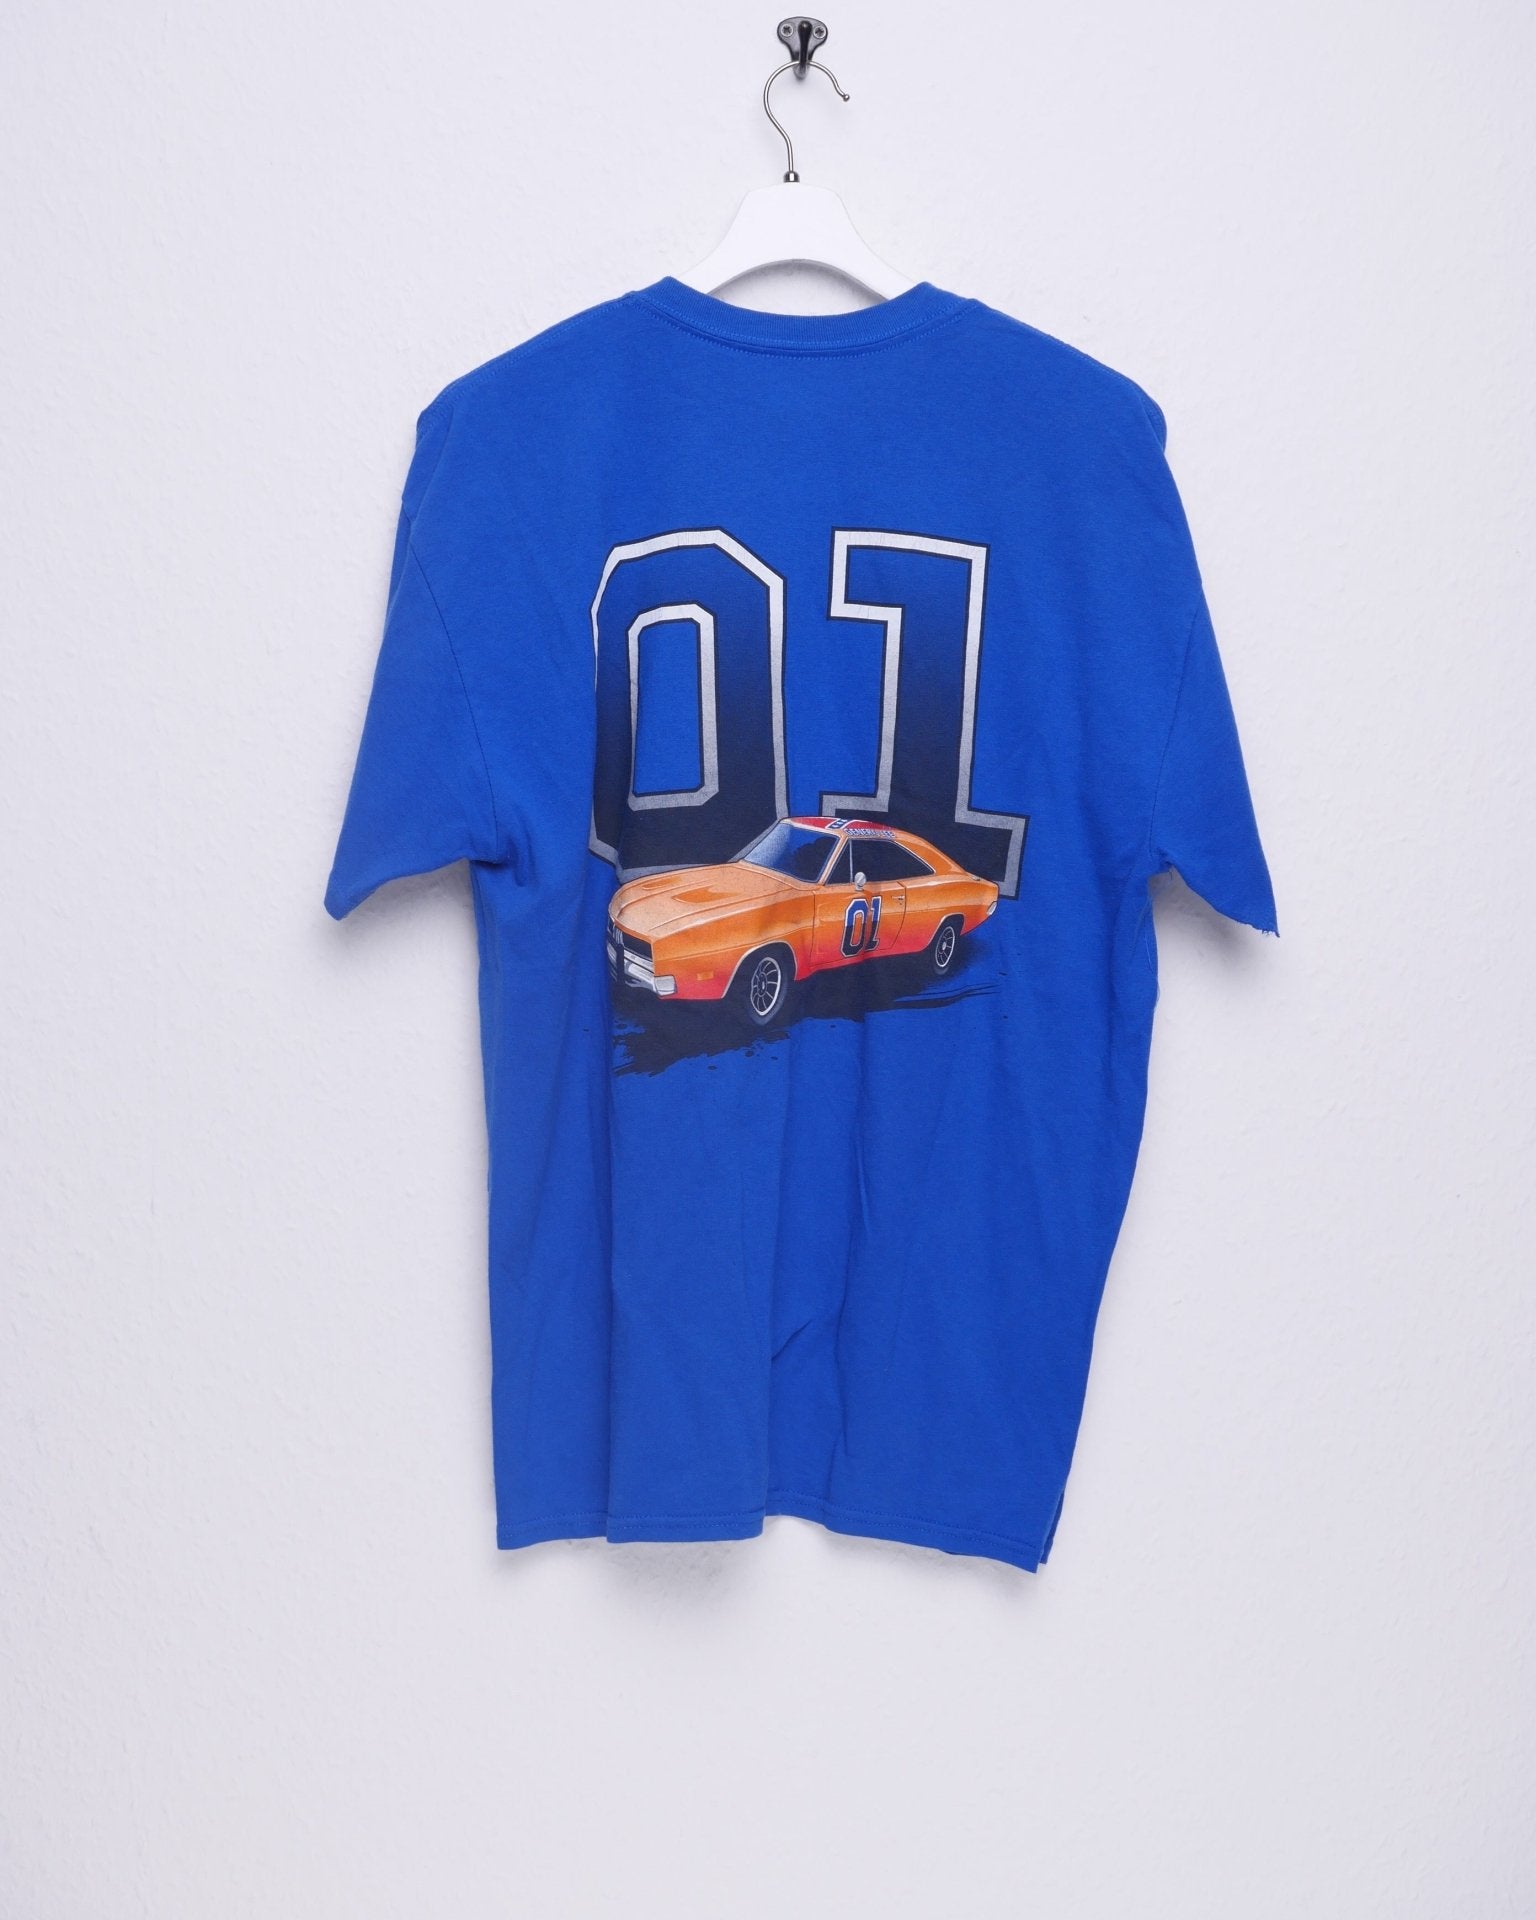 racing 'Cooters Nashville' printed Graphic blue Shirt - Peeces